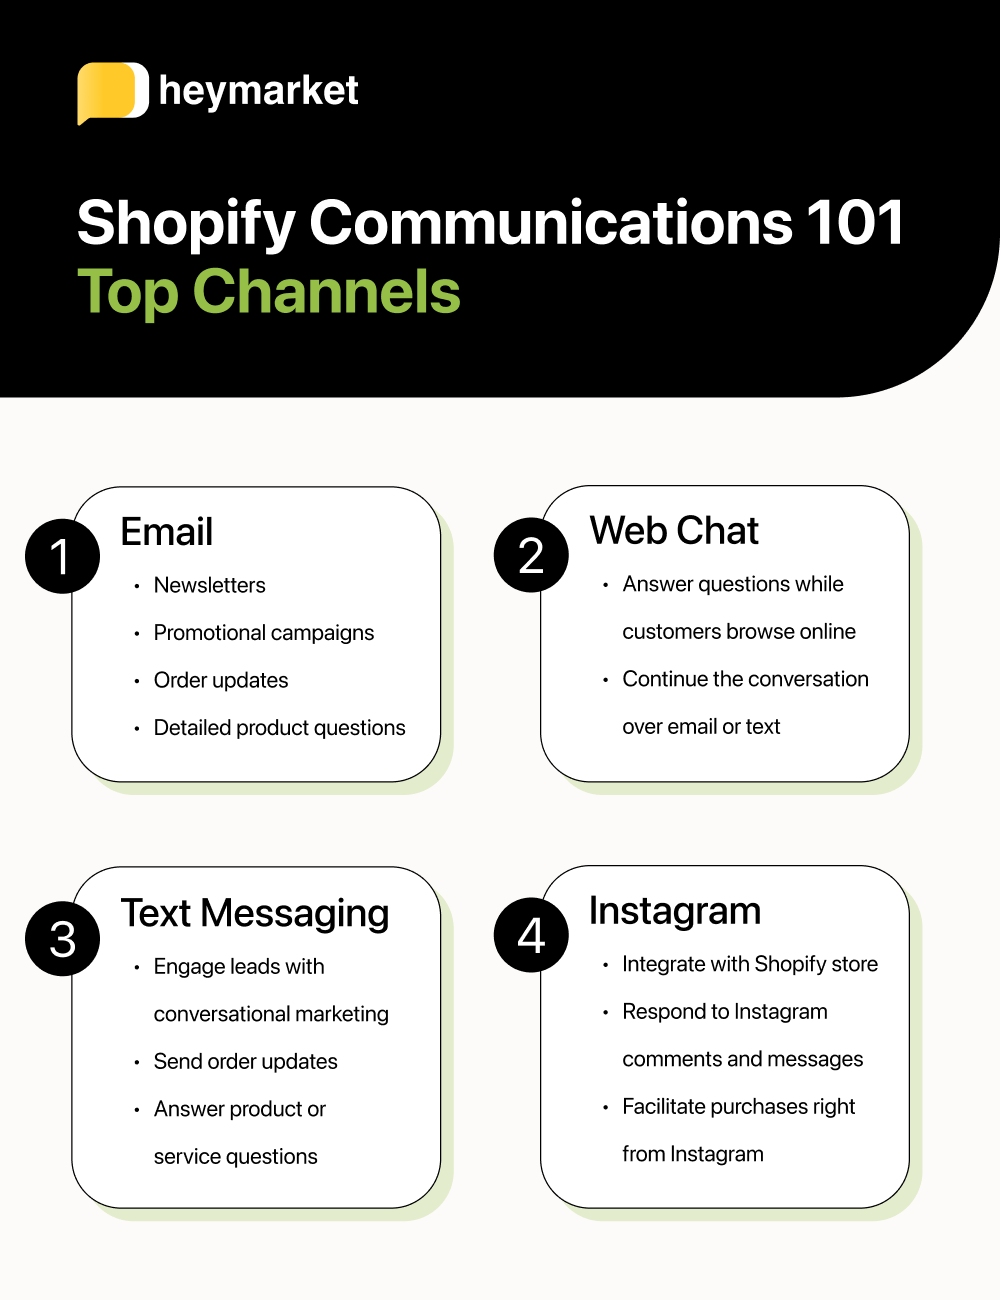 Graphic describing how to use email, web chat, text messaging, and Instagram for Shopify